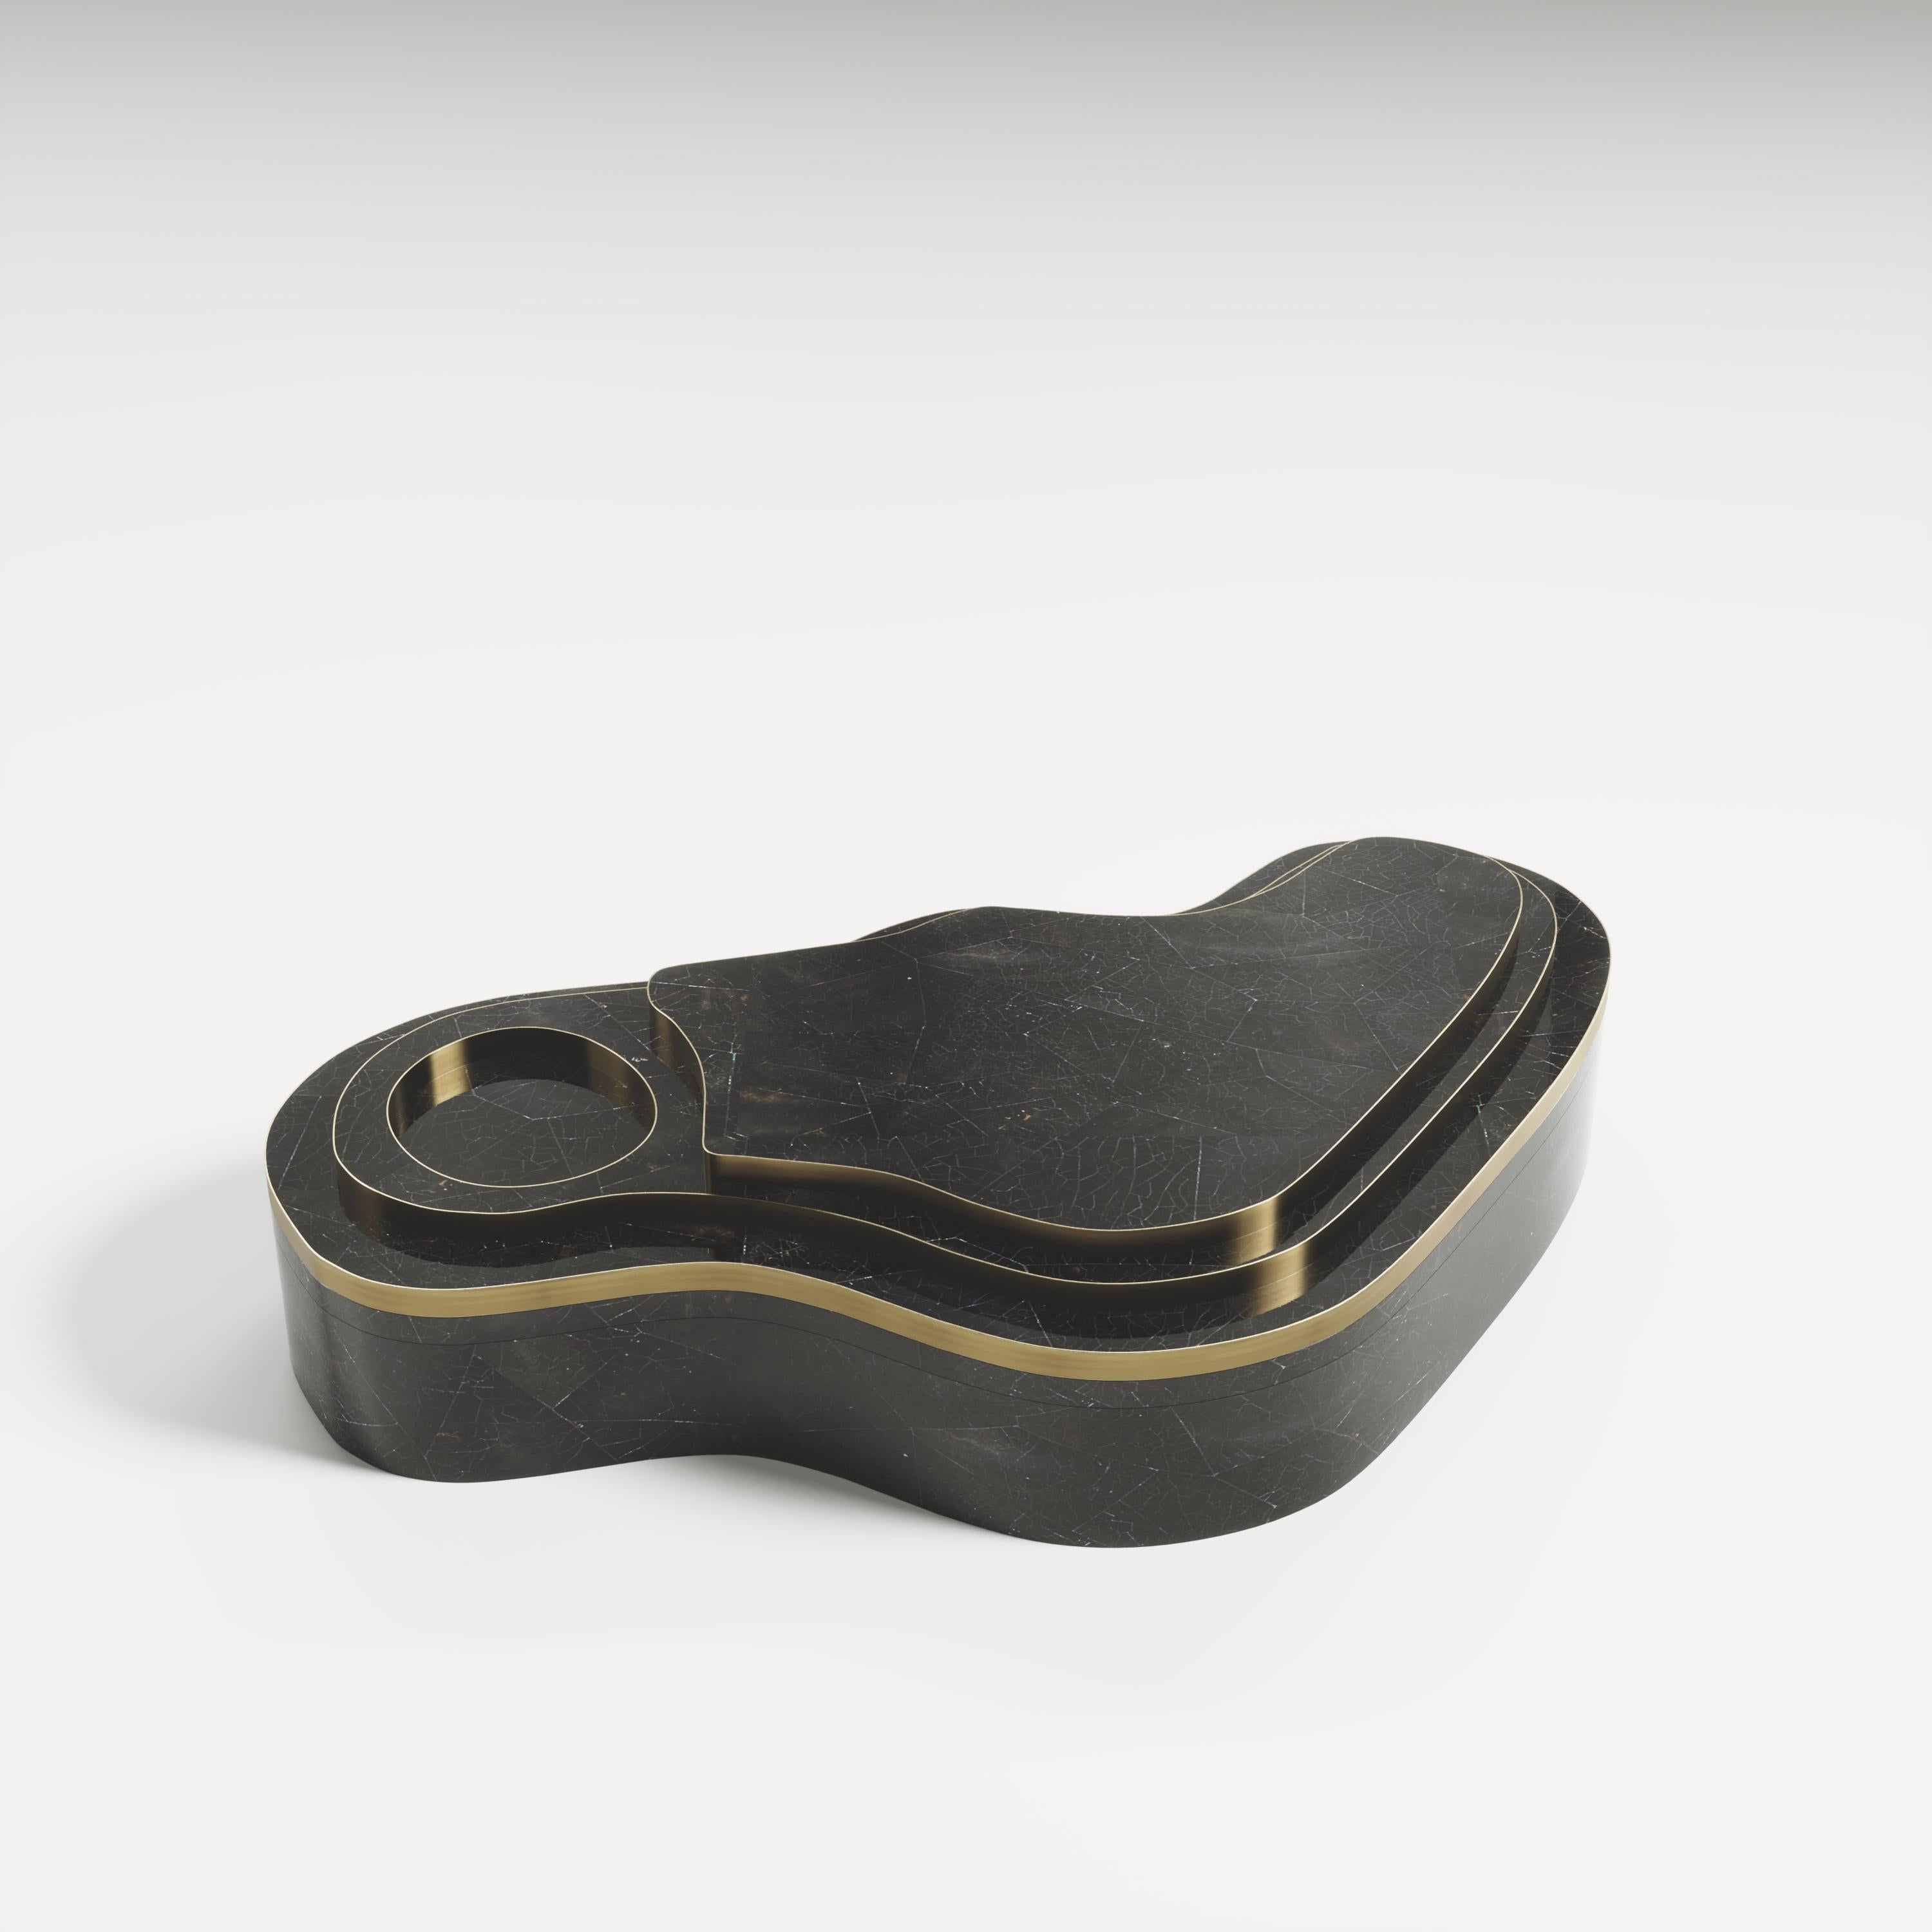 The Mask Box with relief by Kifu Paris is a versatile and organic piece. The amorphous top and base are inlaid in a mixture of black shell and bronze-patina brass. This piece is designed by Kifu Augousti the daughter of Ria and Yiouri Augousti.